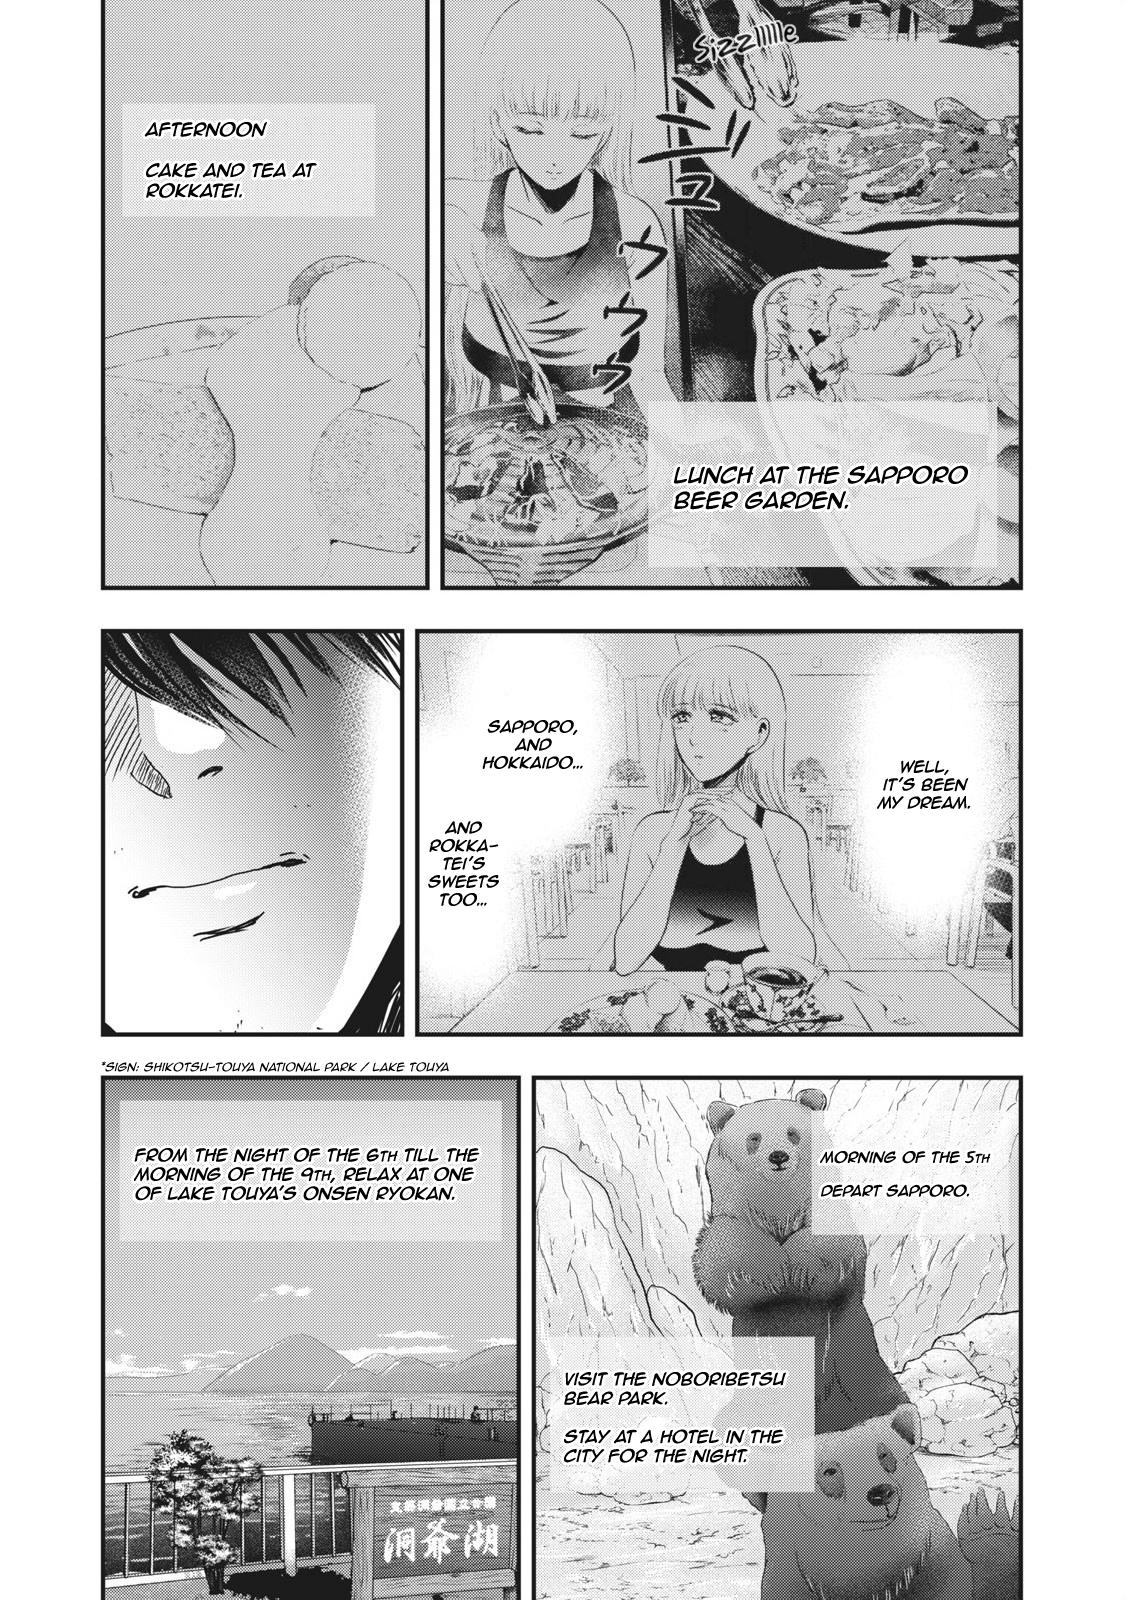 Eating Crab With A Yukionna - Page 4